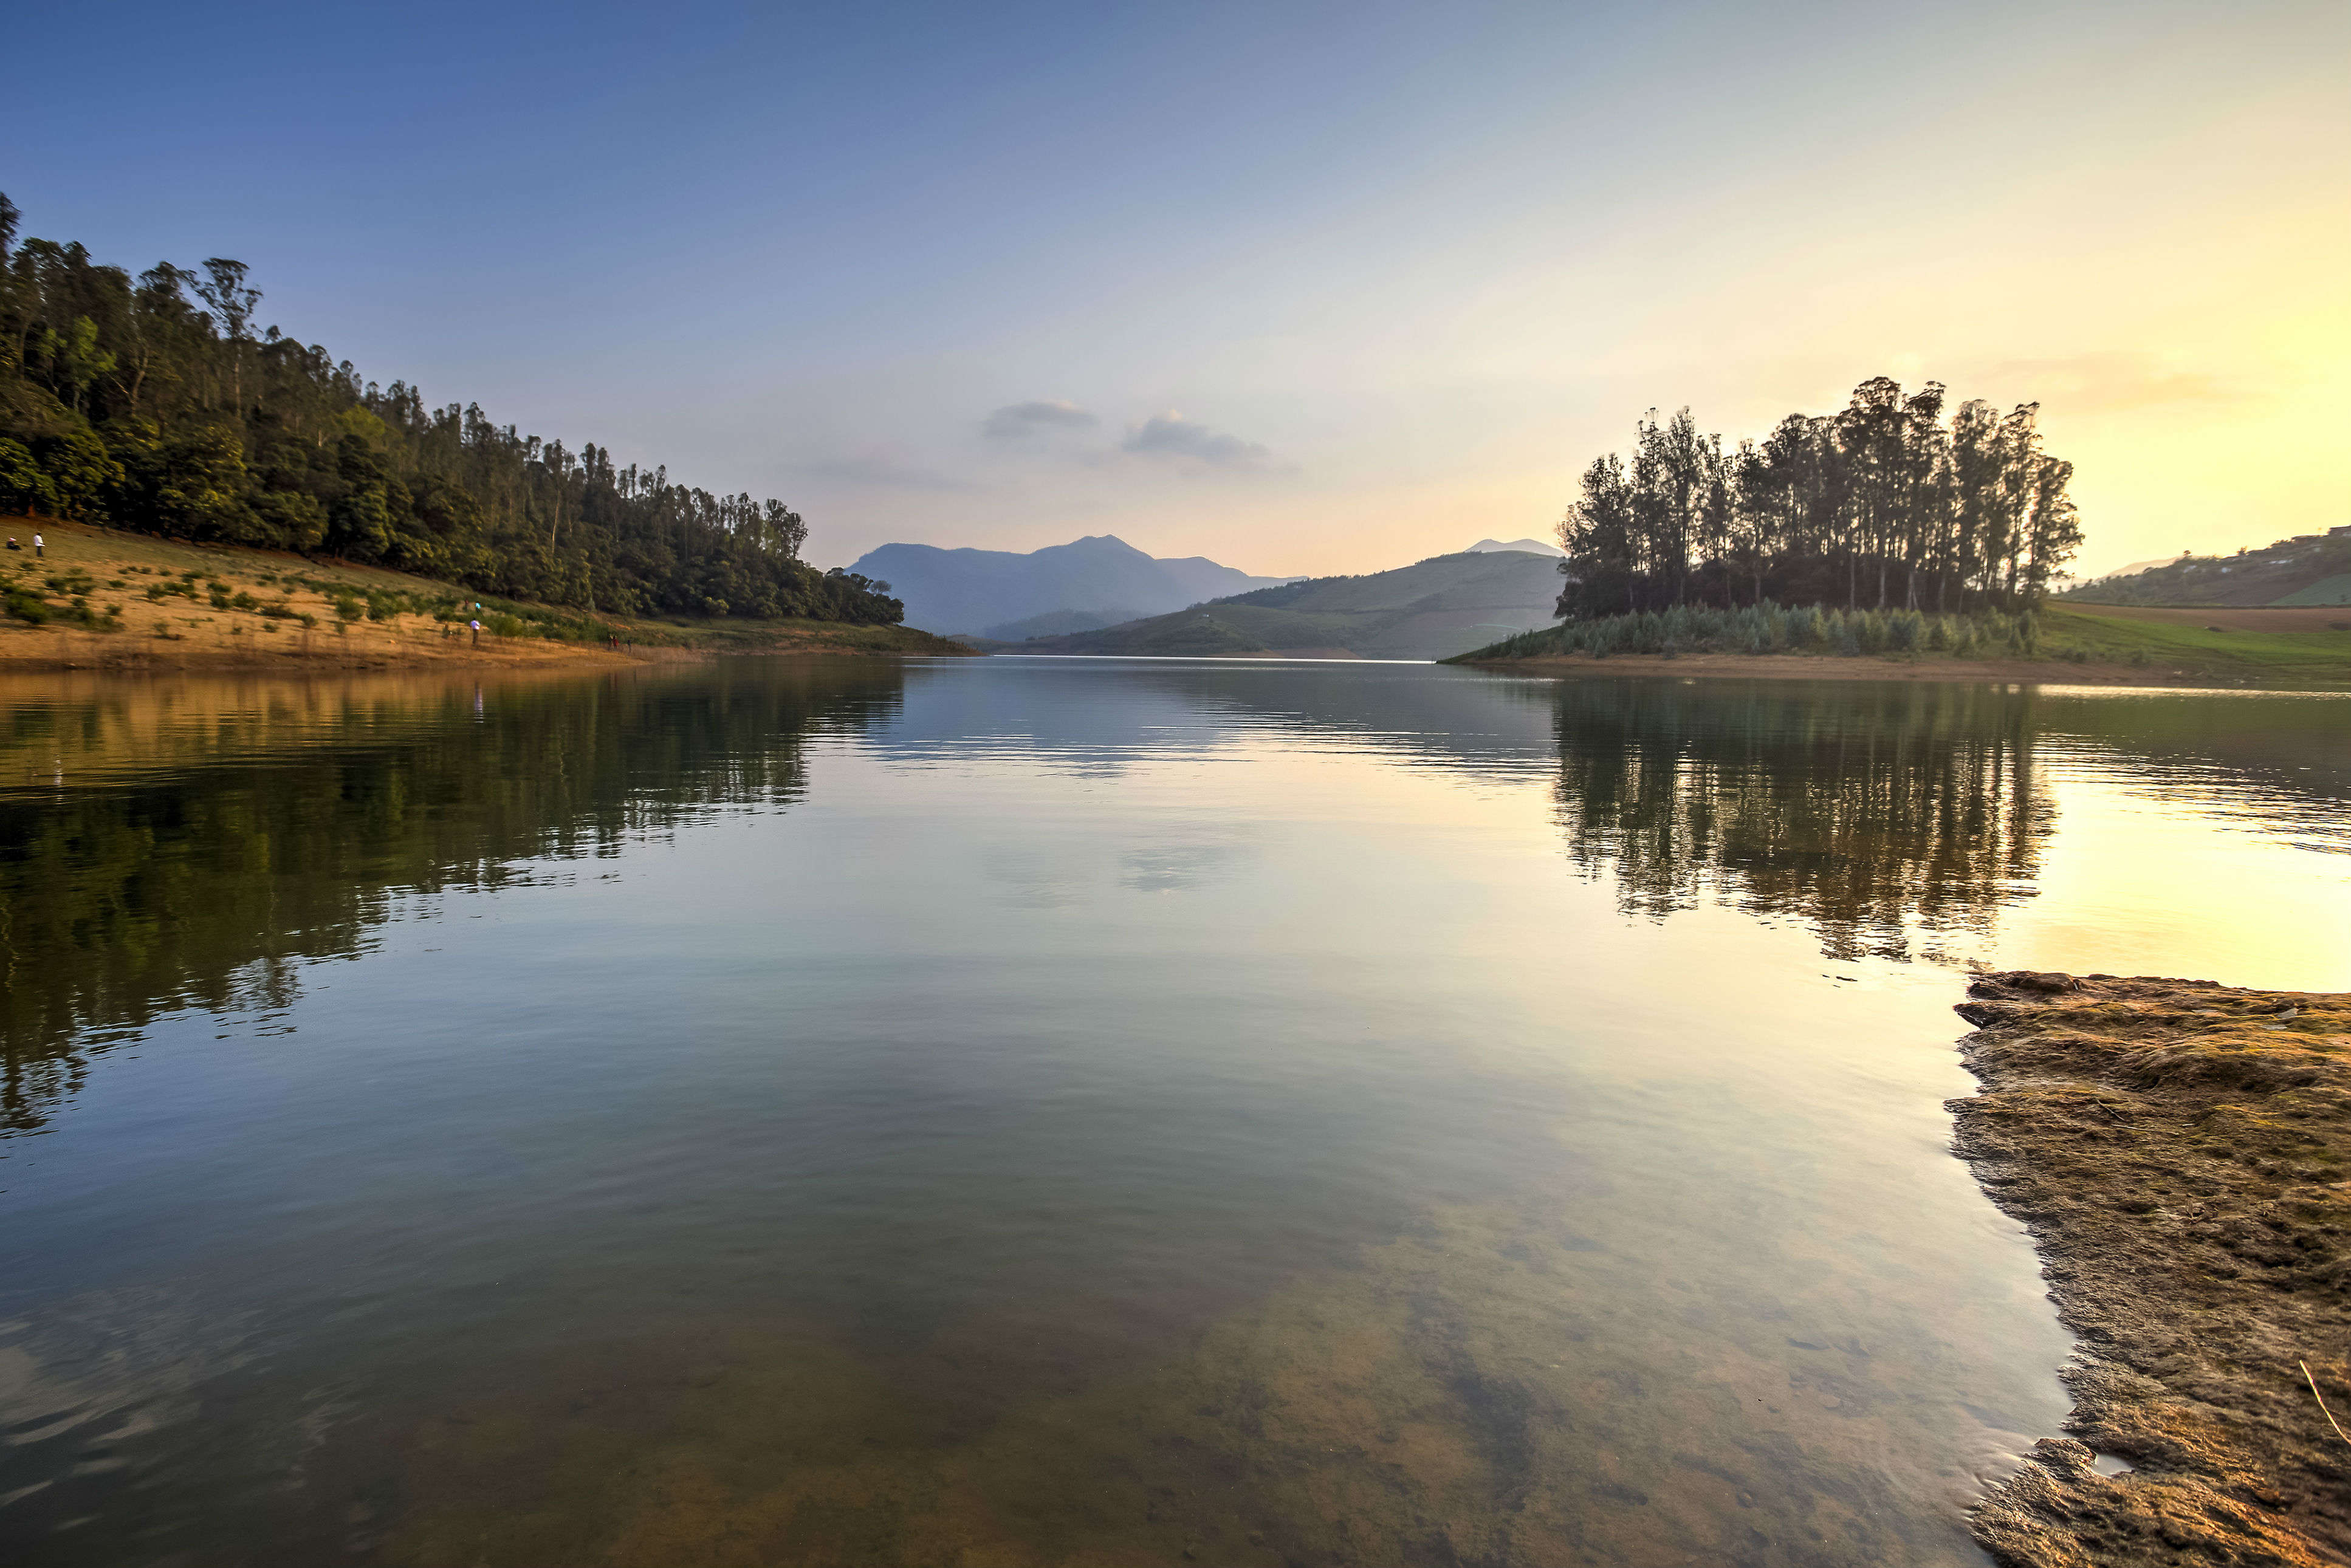 Pick a hotel near the Ooty Lake for that perfect holiday